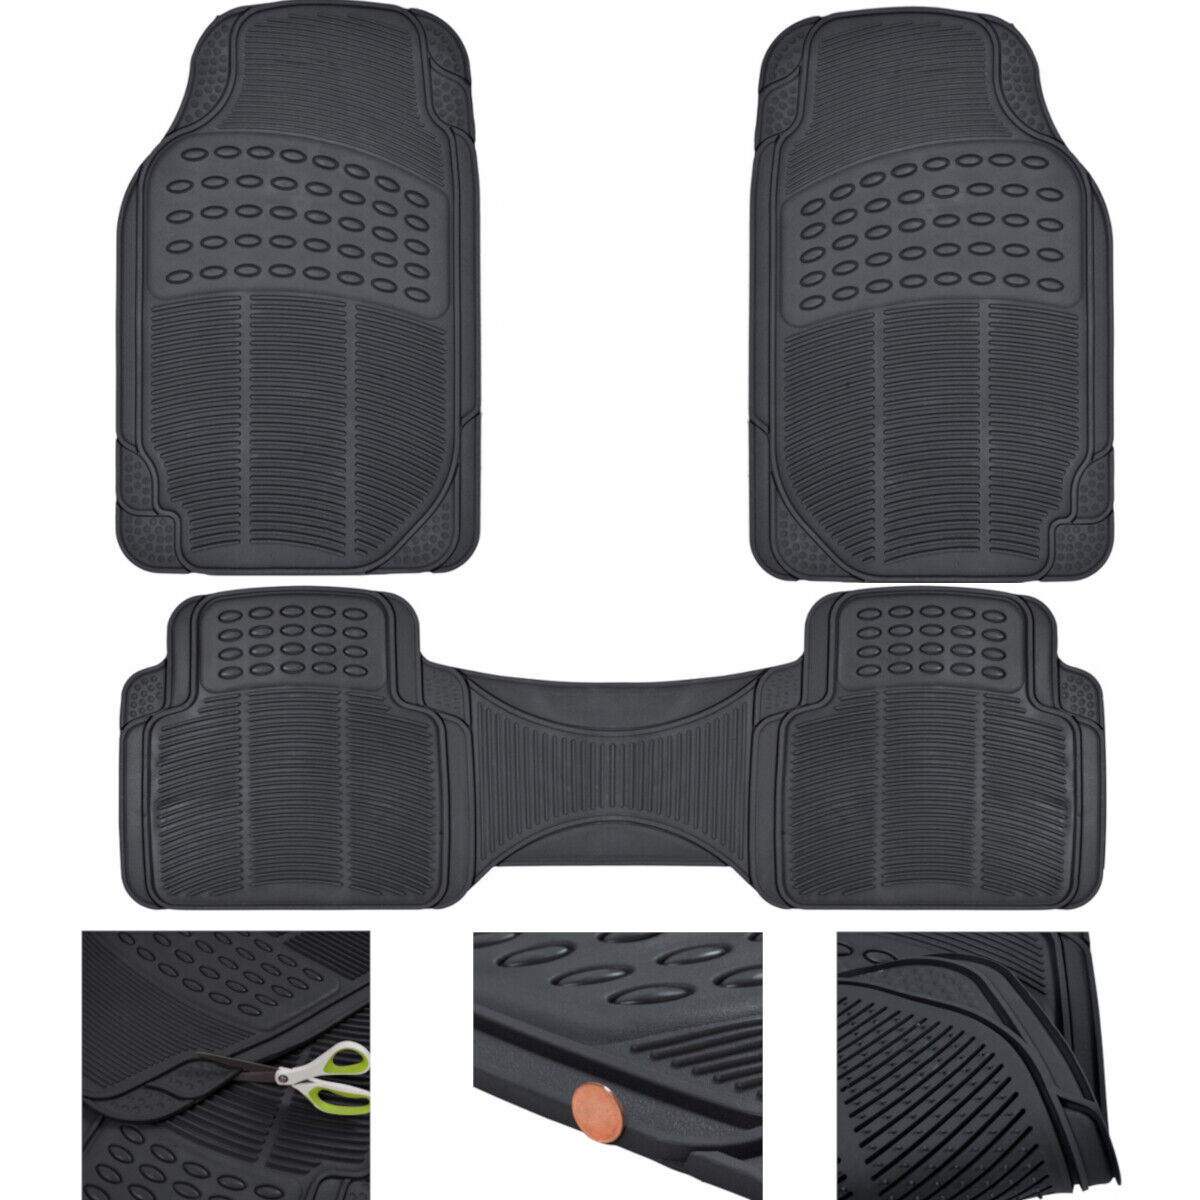 Car Floor Mats All Weather Semi Custom Fit Heavy Duty Trimmable Black 3PC